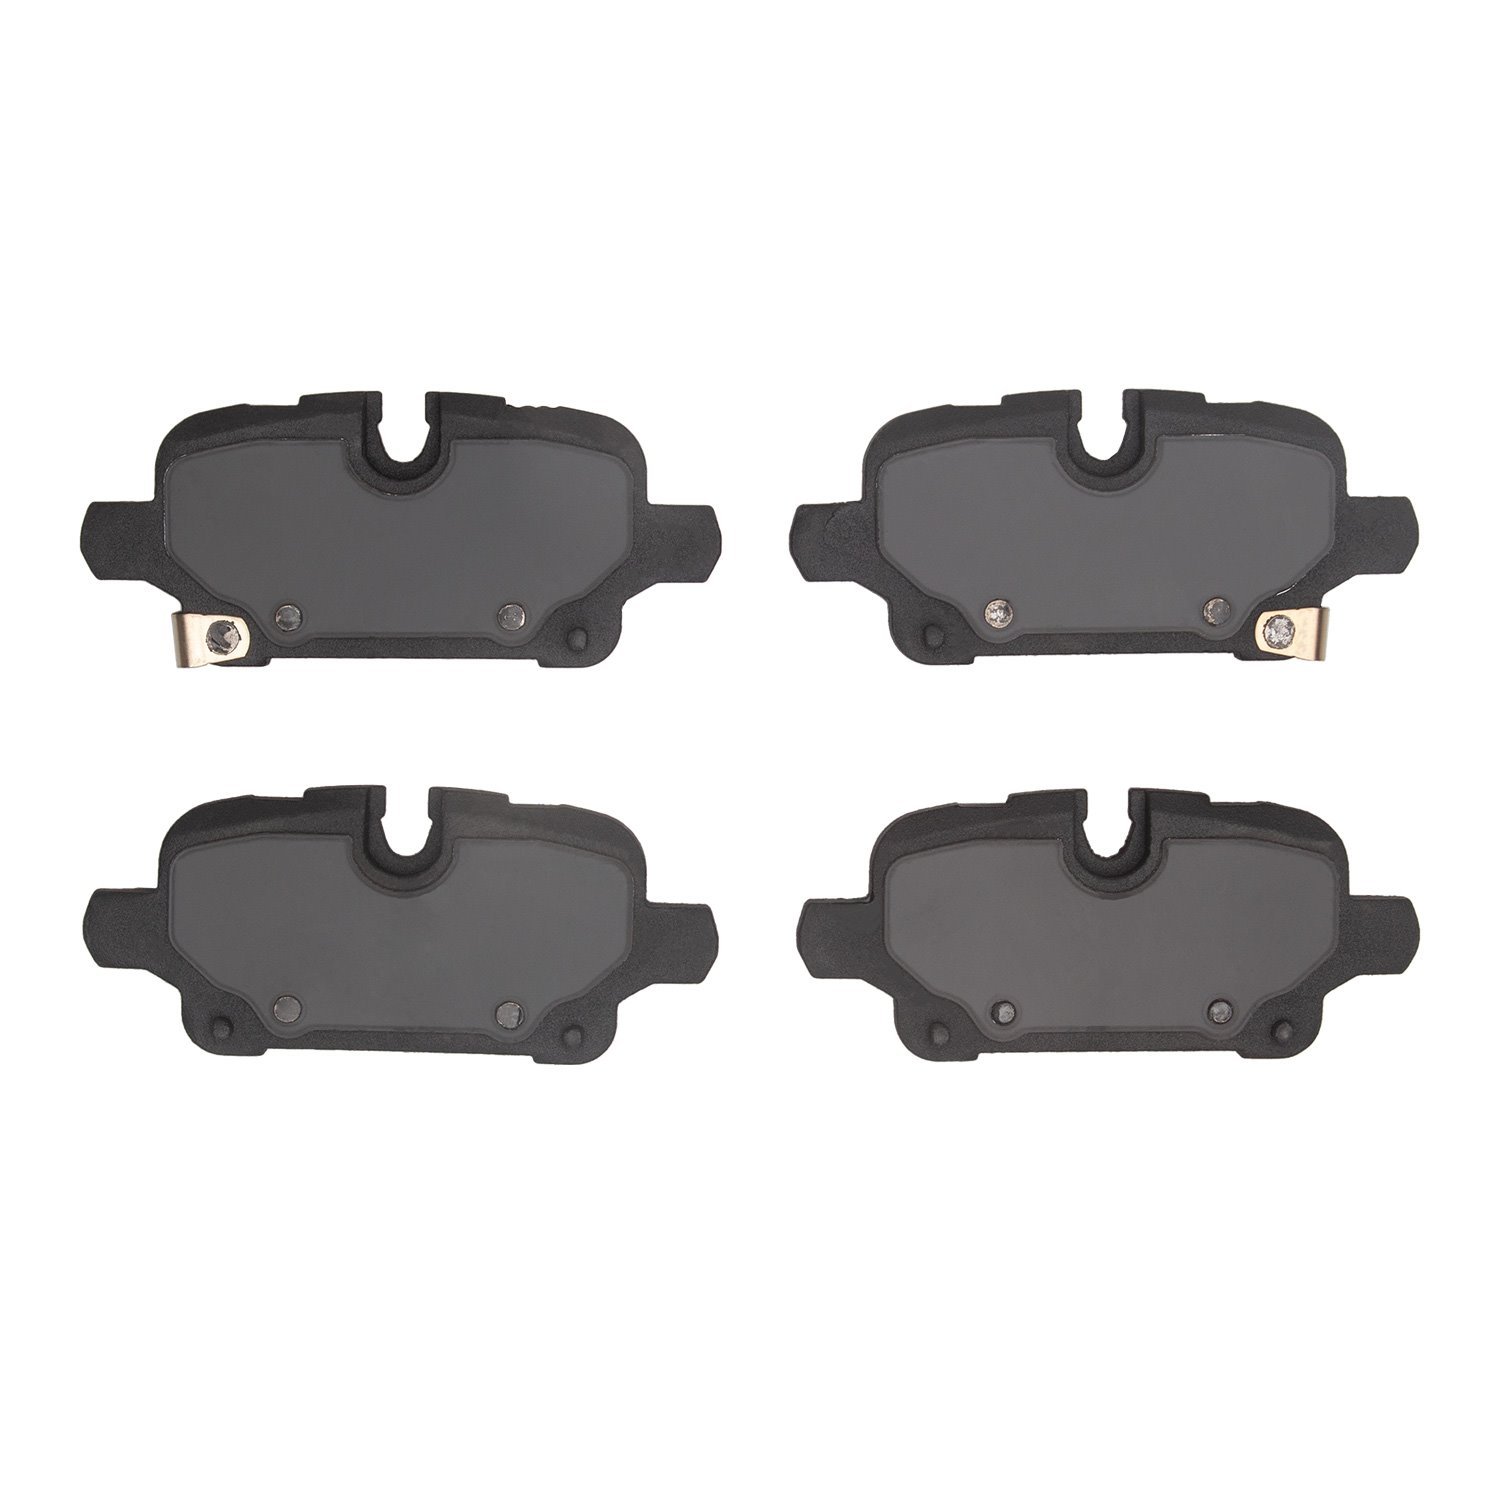 1310-2374-00 3000-Series Ceramic Brake Pads, Fits Select GM, Position: Rear